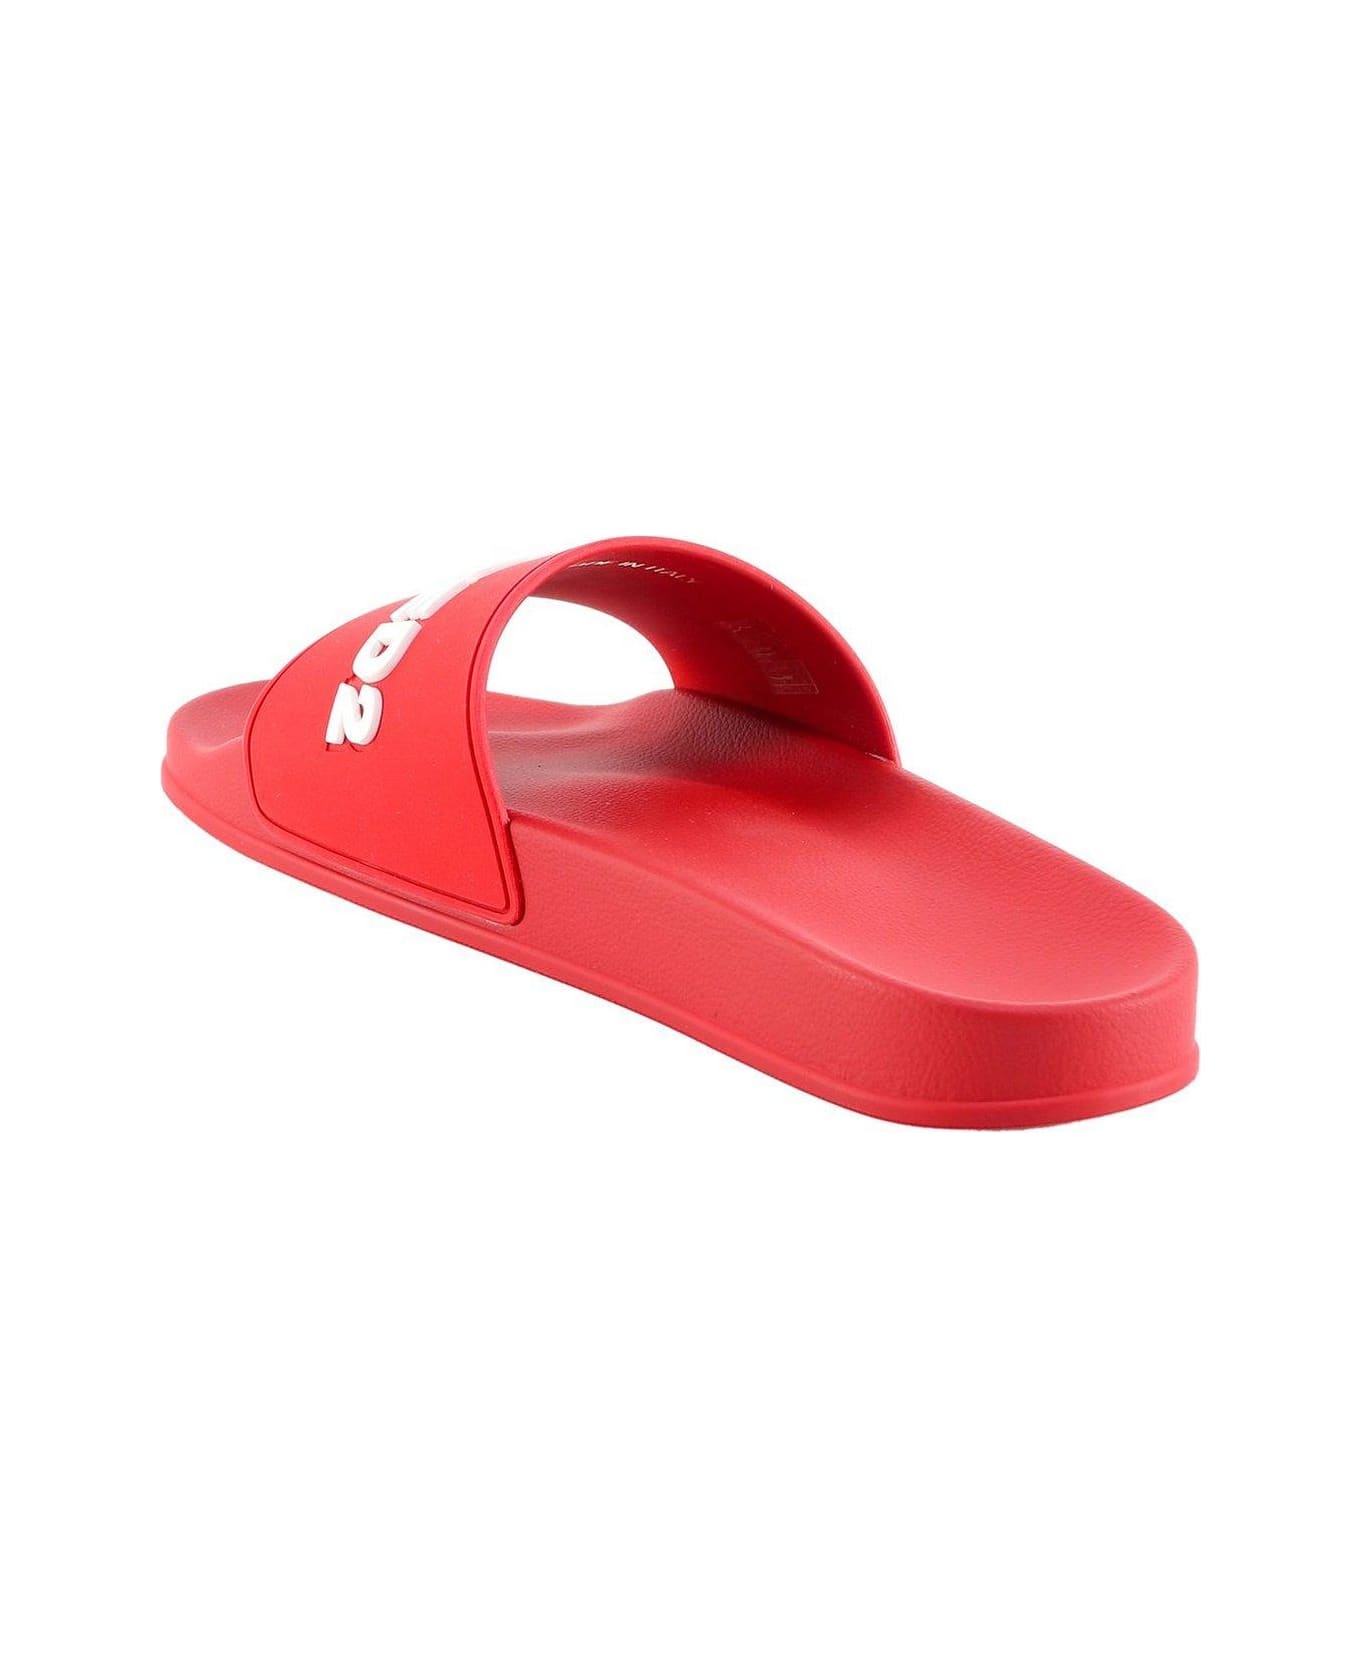 Dsquared2 Logo Embossed Slides - Rosso その他各種シューズ